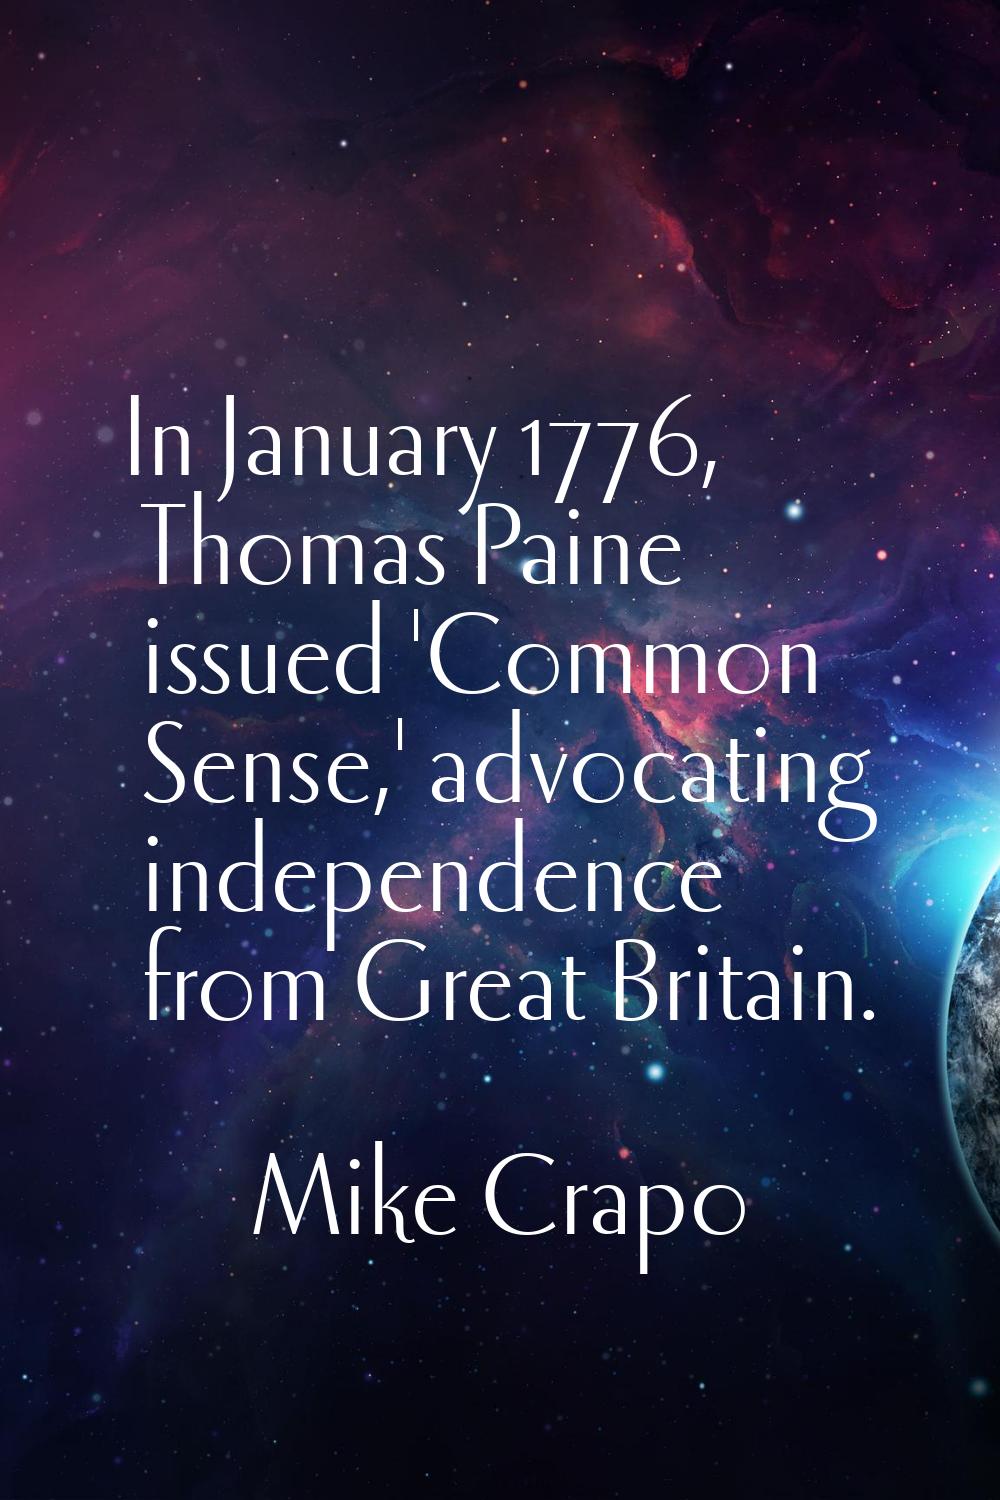 In January 1776, Thomas Paine issued 'Common Sense,' advocating independence from Great Britain.